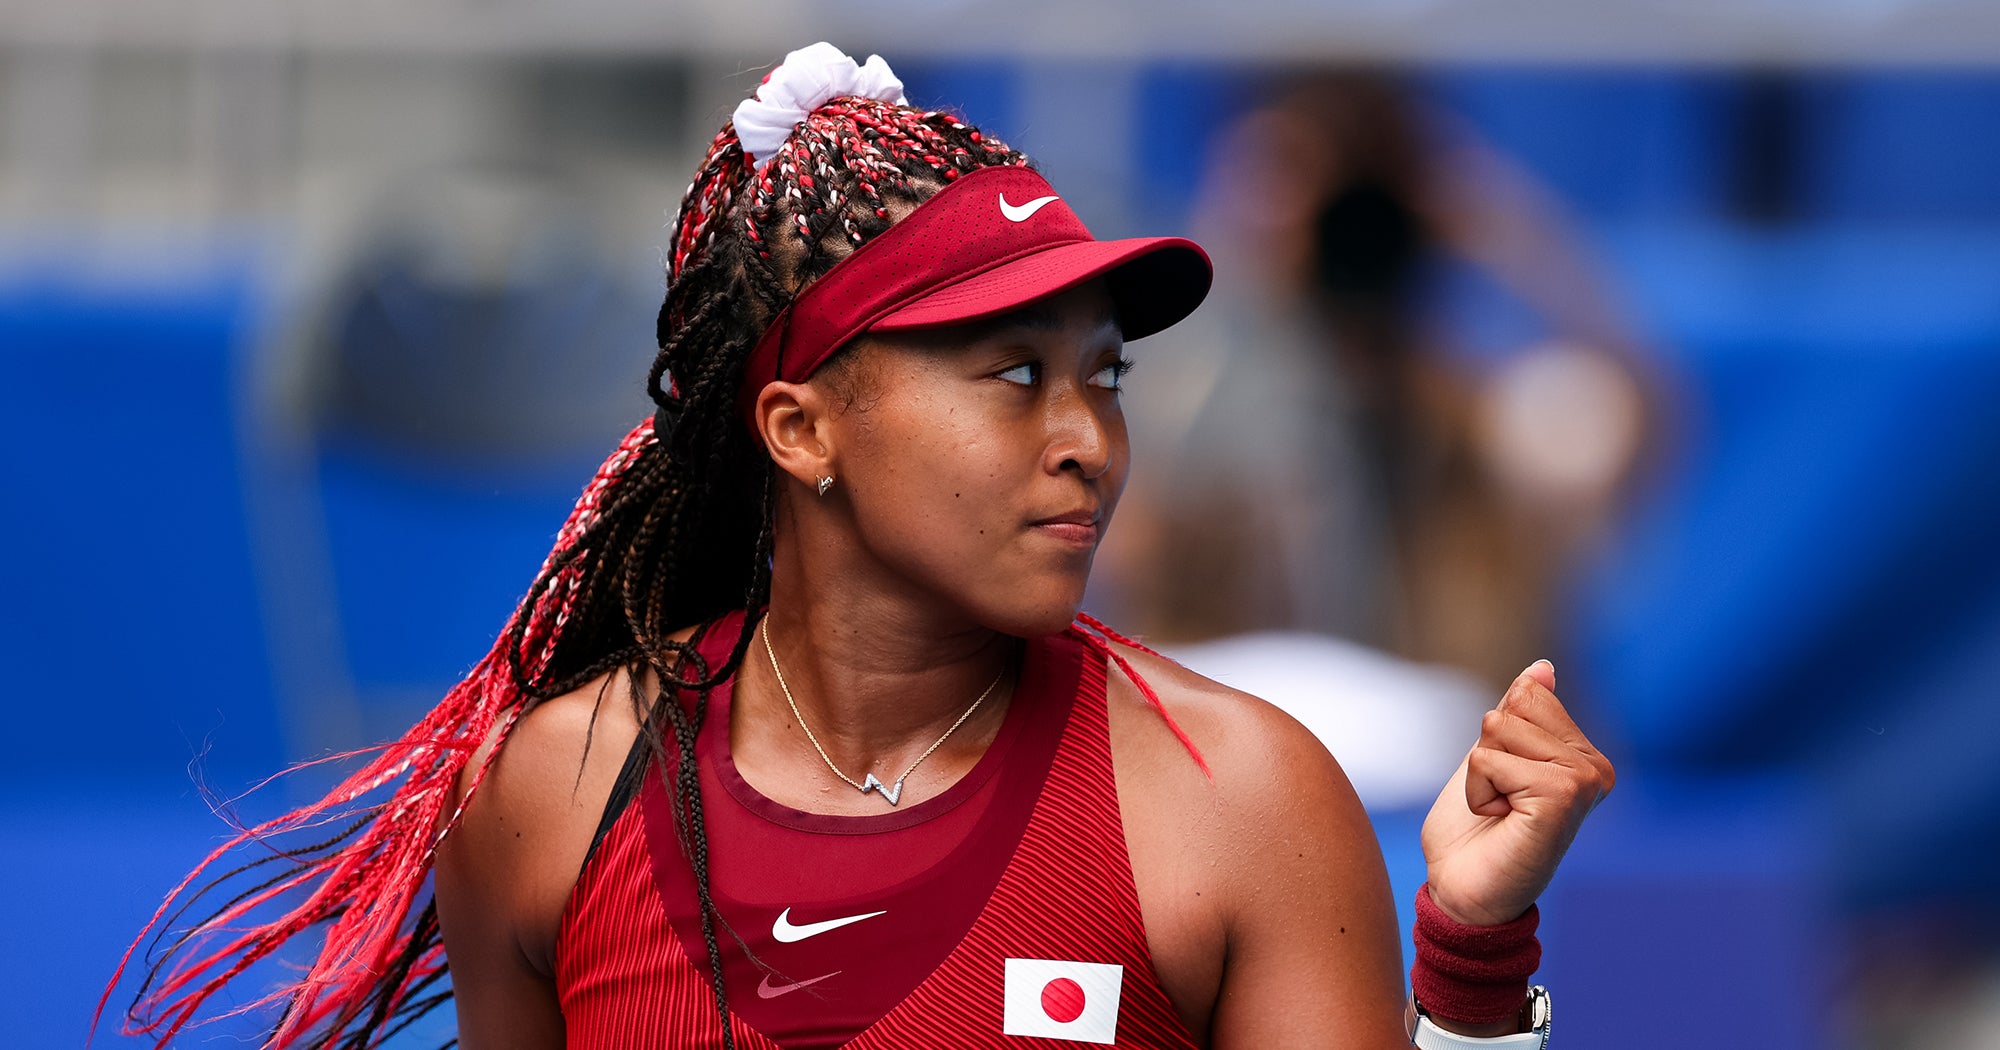 Naomi Osaka on Levi's Collab, Personal Style & Stretching Her Talents